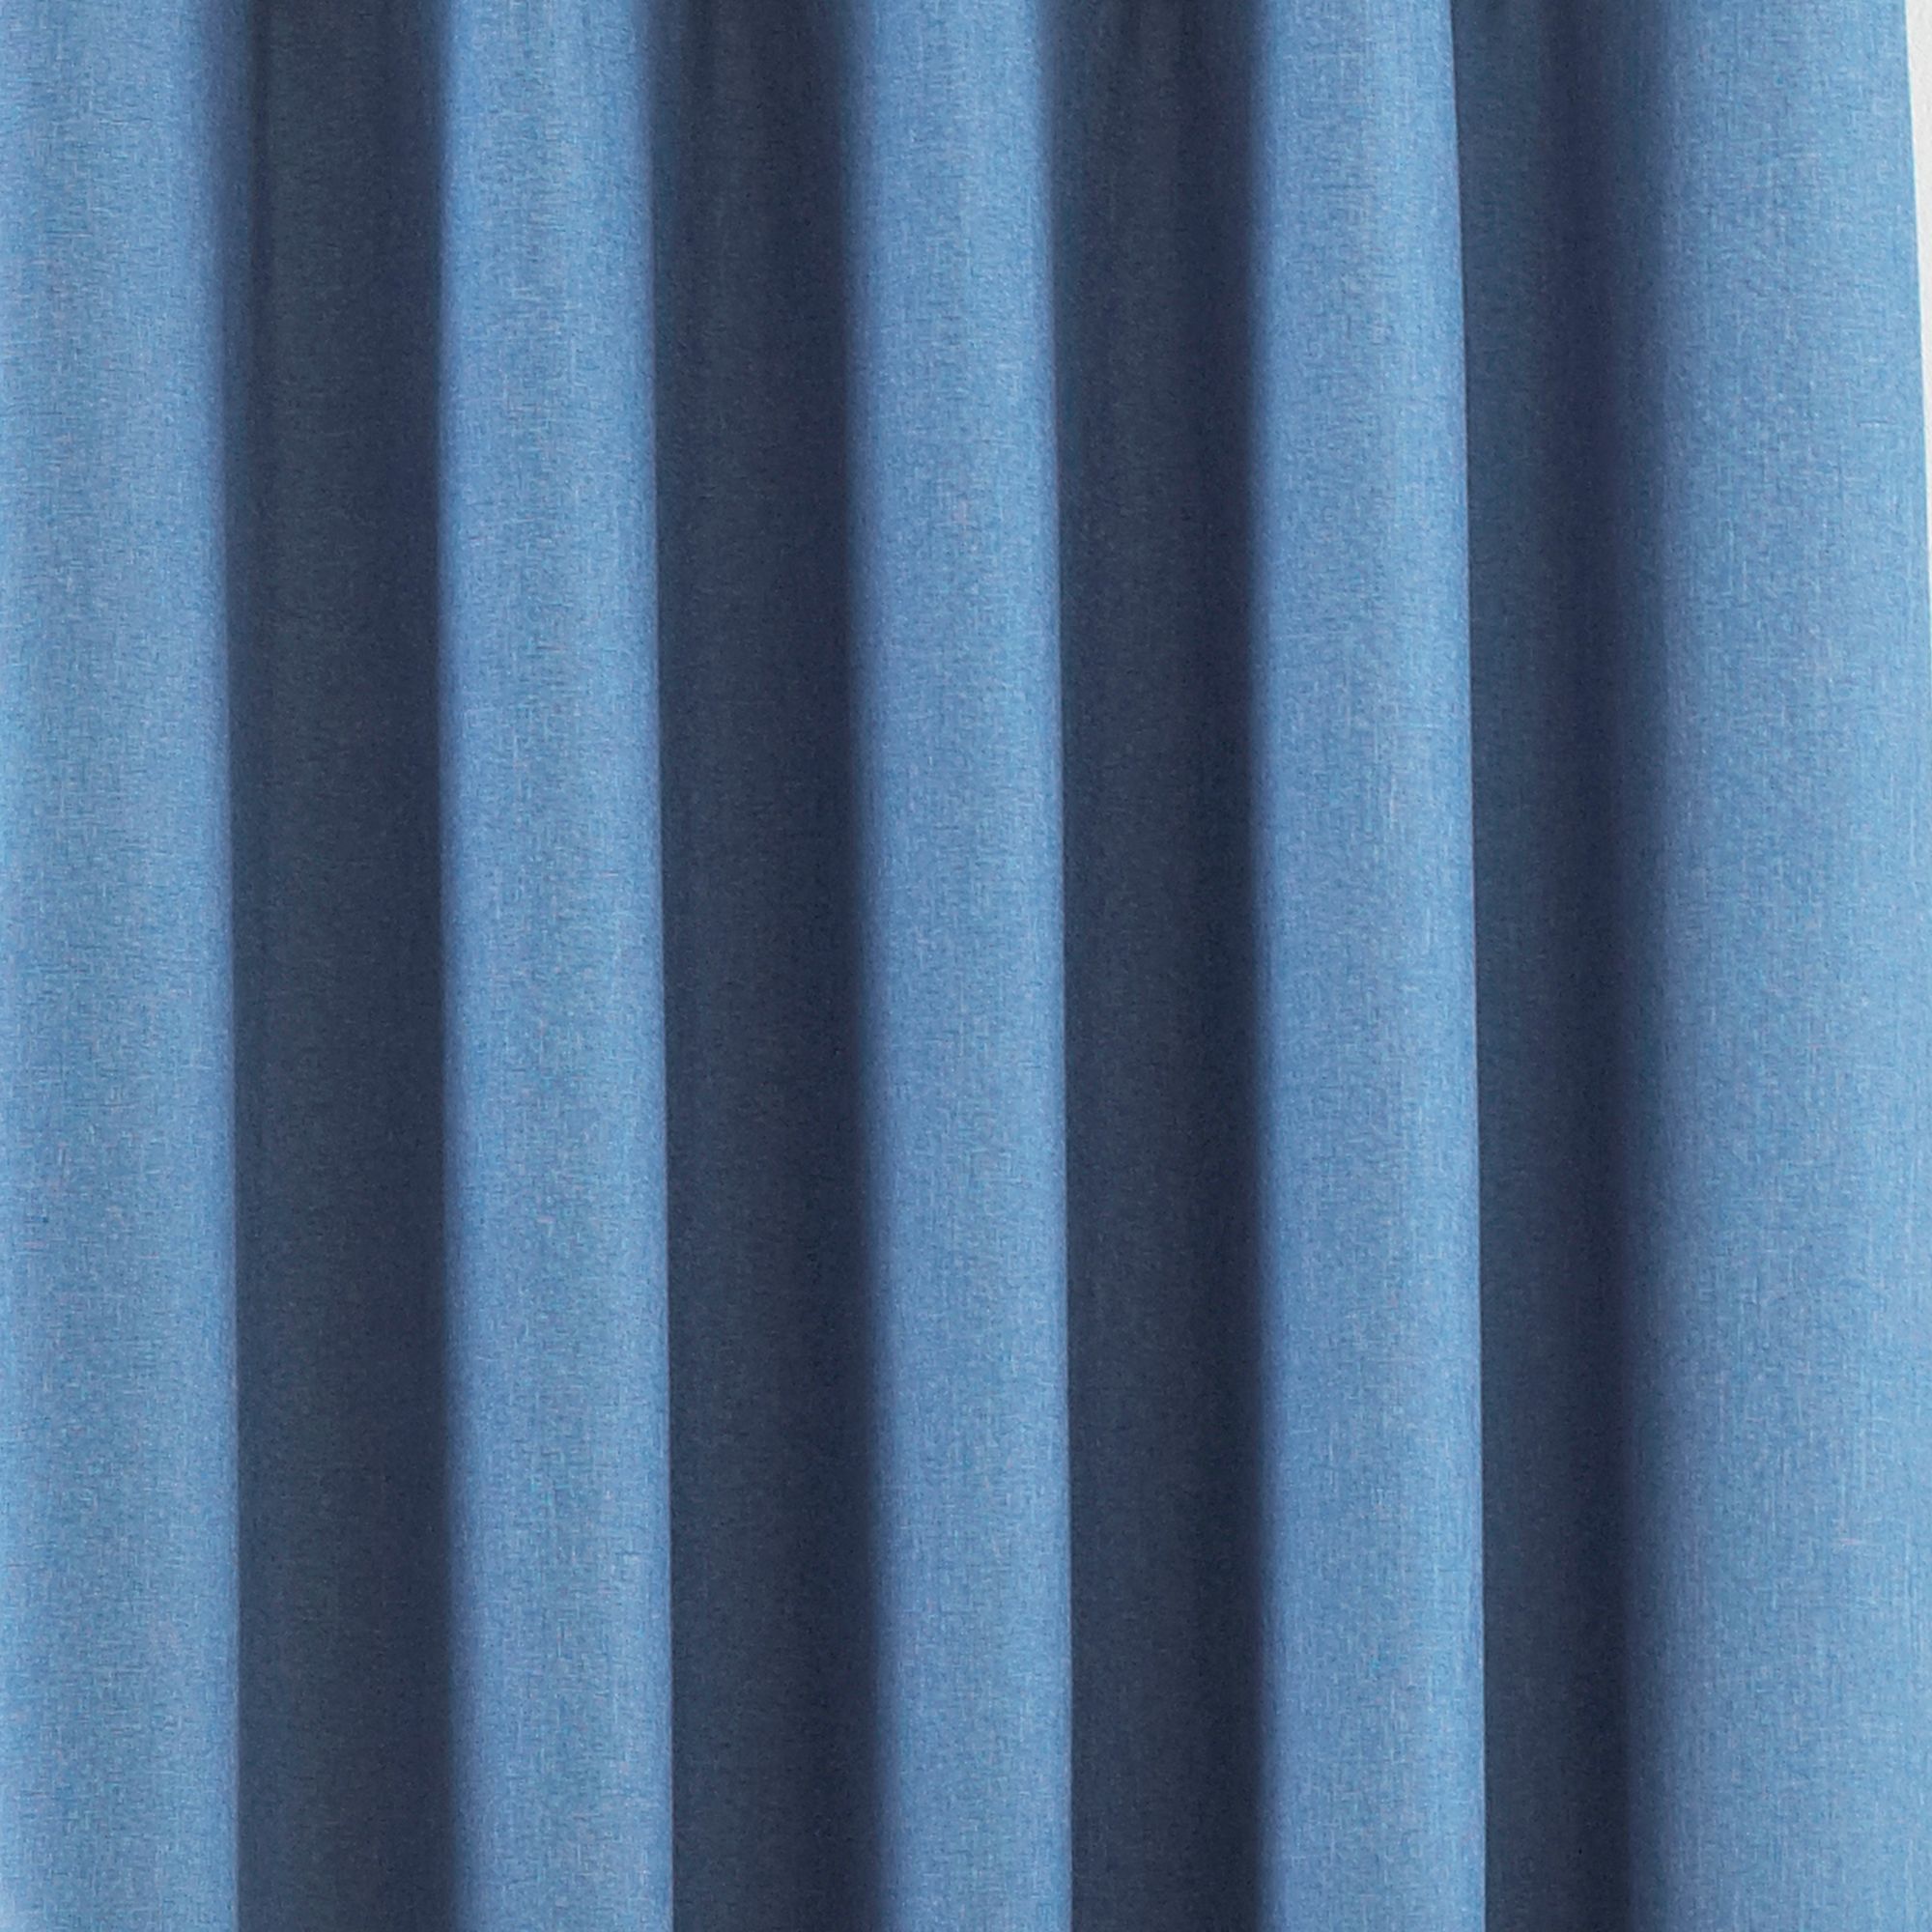 Whether you prefer a bright and cheery room or a more natural atmosphere the Eclipse curtains have a shade for you. These effective blackout curtains have a 3-pass blackout lining to ensure you have the best sleep of your life. The Eclipse curtain is an energy efficient choice as they are temperature controlled making your room cool in summer and warm in winter. With stainless steel eyelet holes the Eclipse curtains are easy to hang and only require a curtain pole for installation. They are surprisingly easy to clean as they are machine washable making them perfect for a household with children or pets.